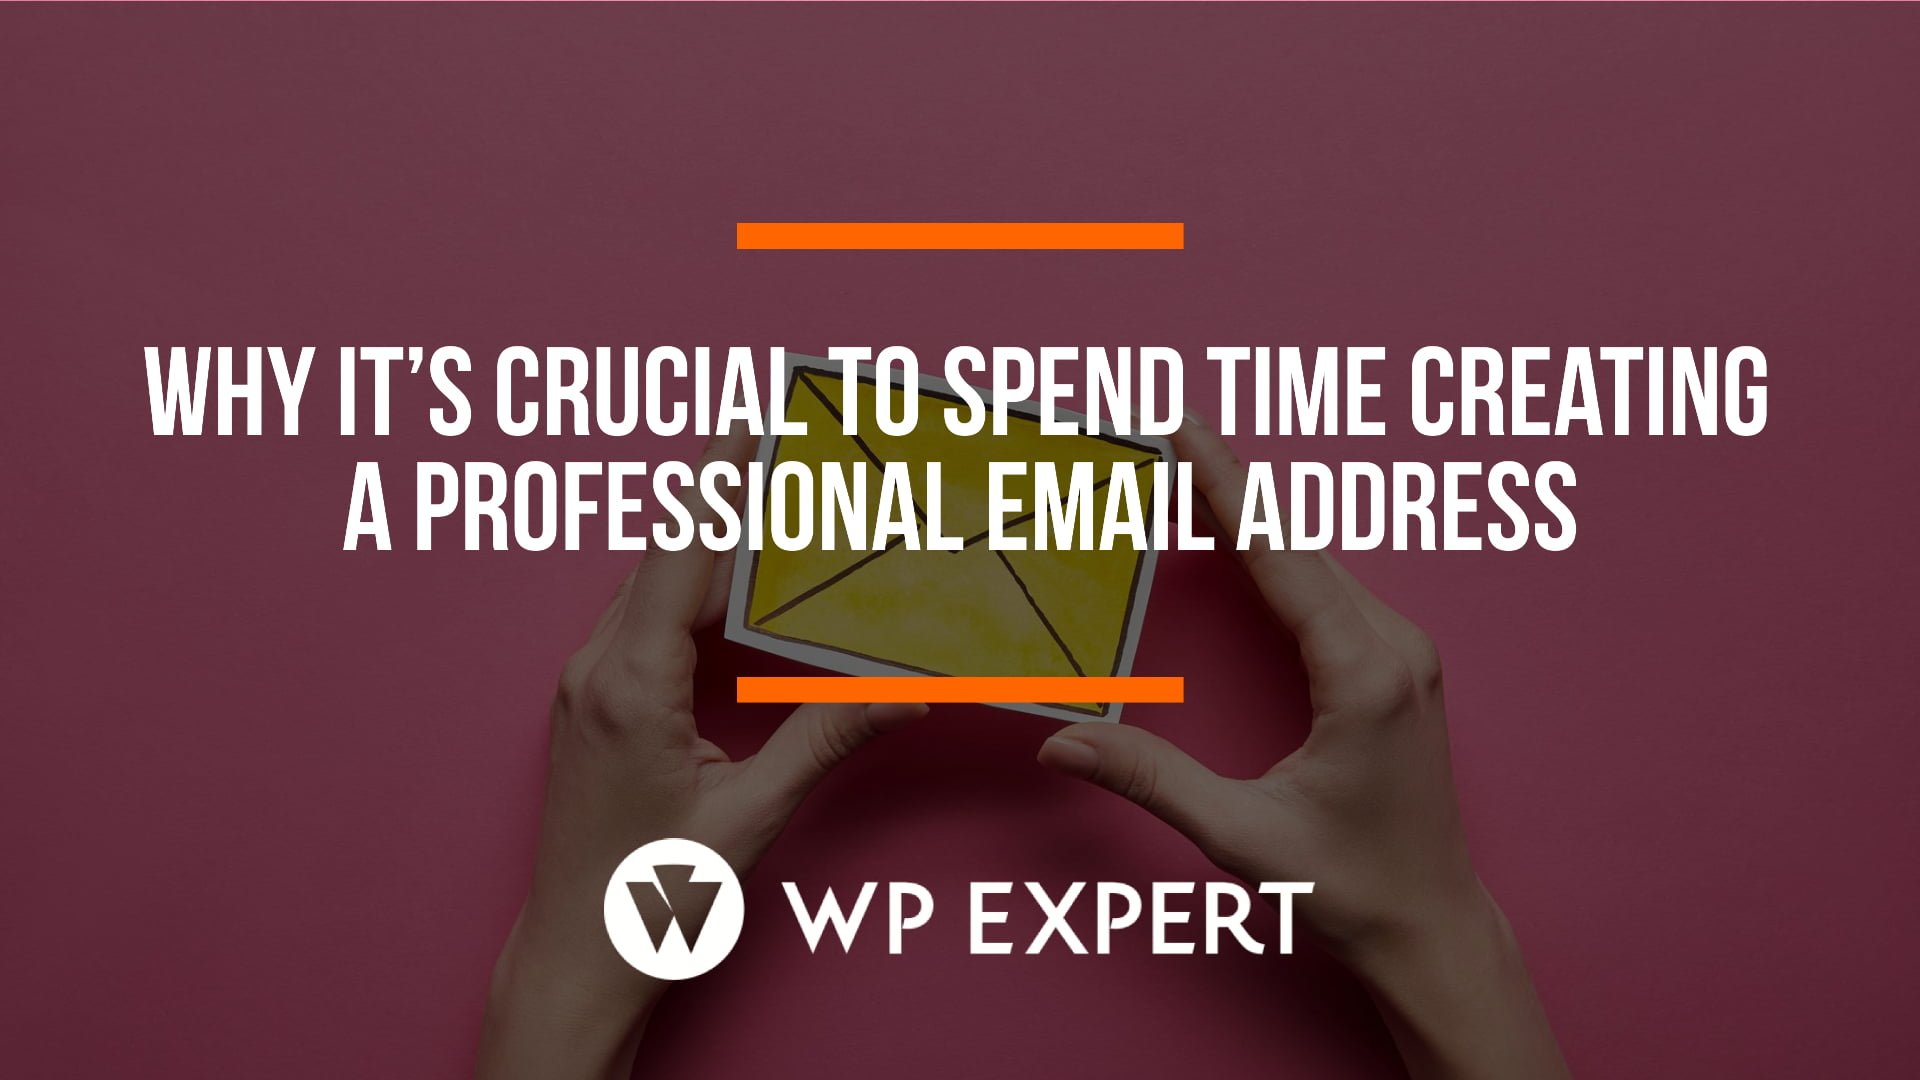 Why It’s Crucial to Spend Time Creating a Professional Email Address